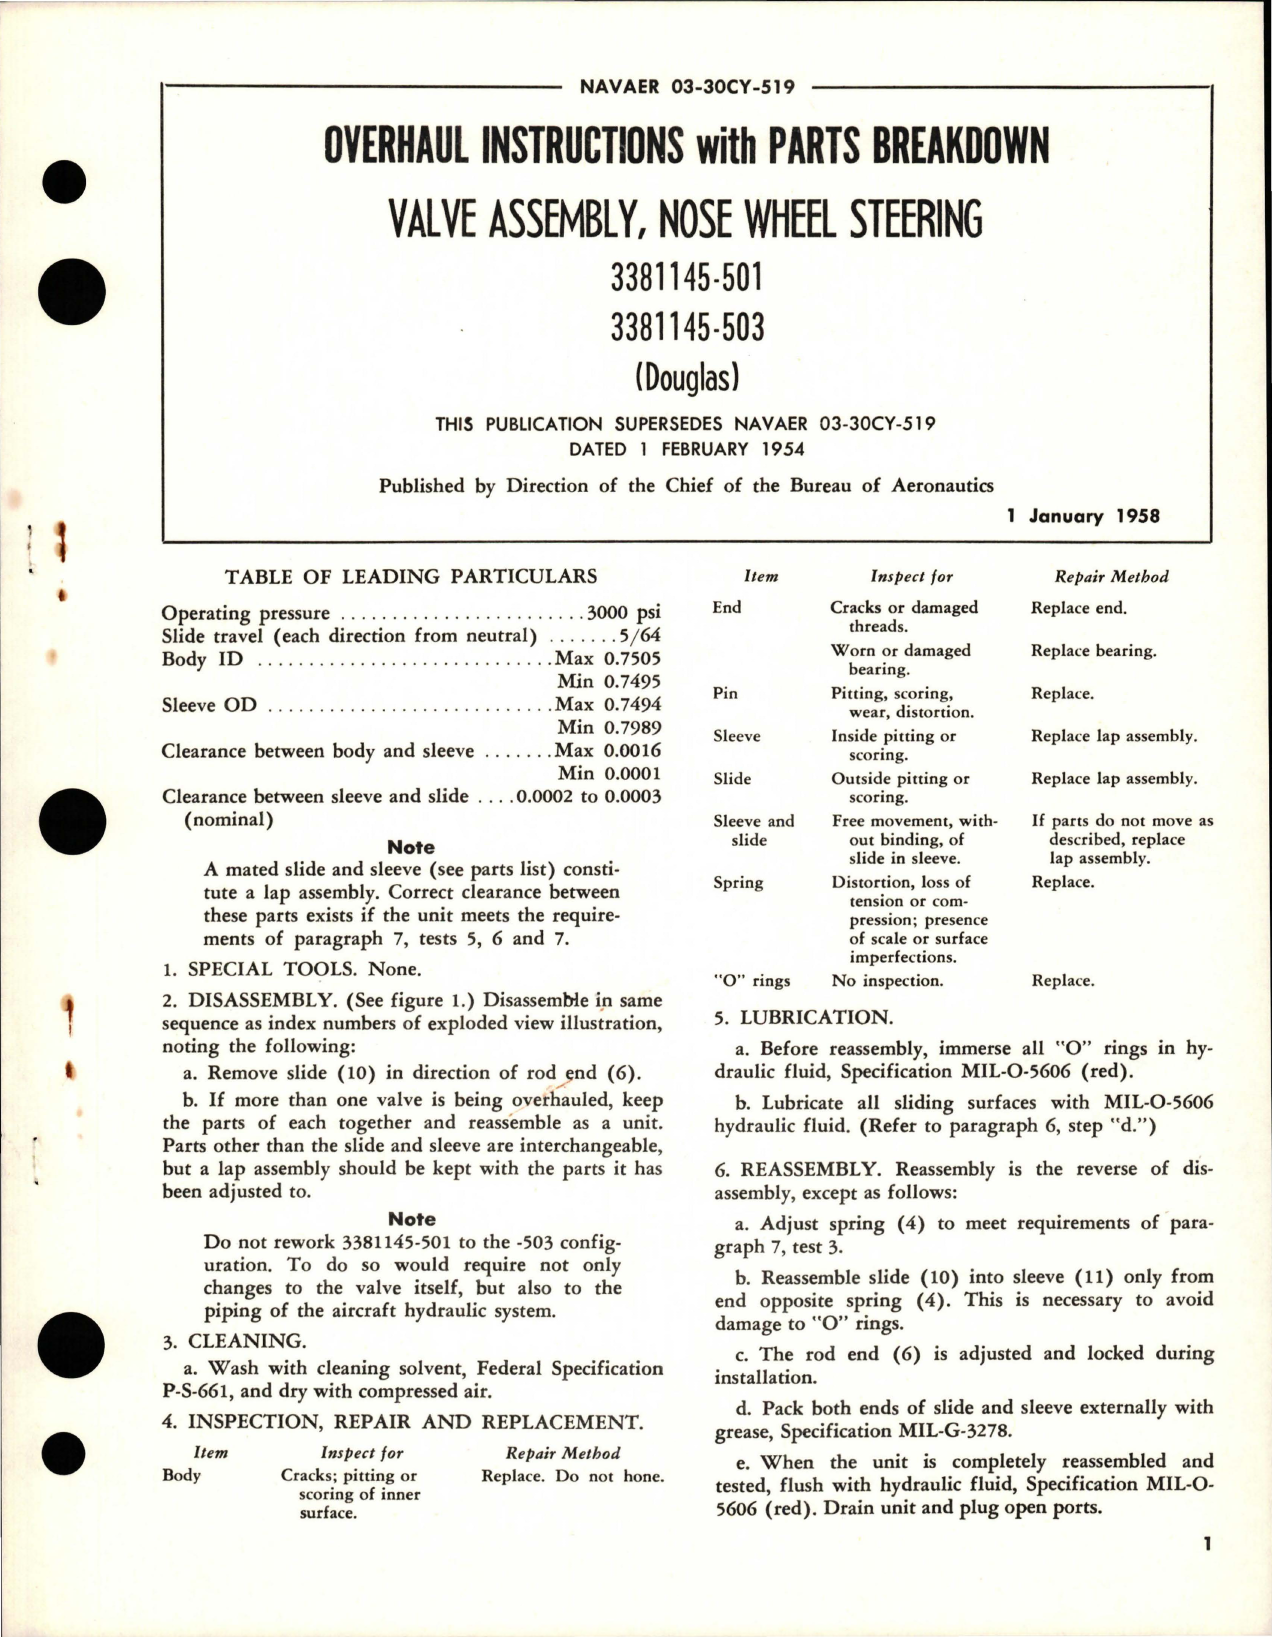 Sample page 1 from AirCorps Library document: Overhaul Instructions with Parts for Nose Wheel Steering Valve Assembly - 3381145-501, 3381145-503 